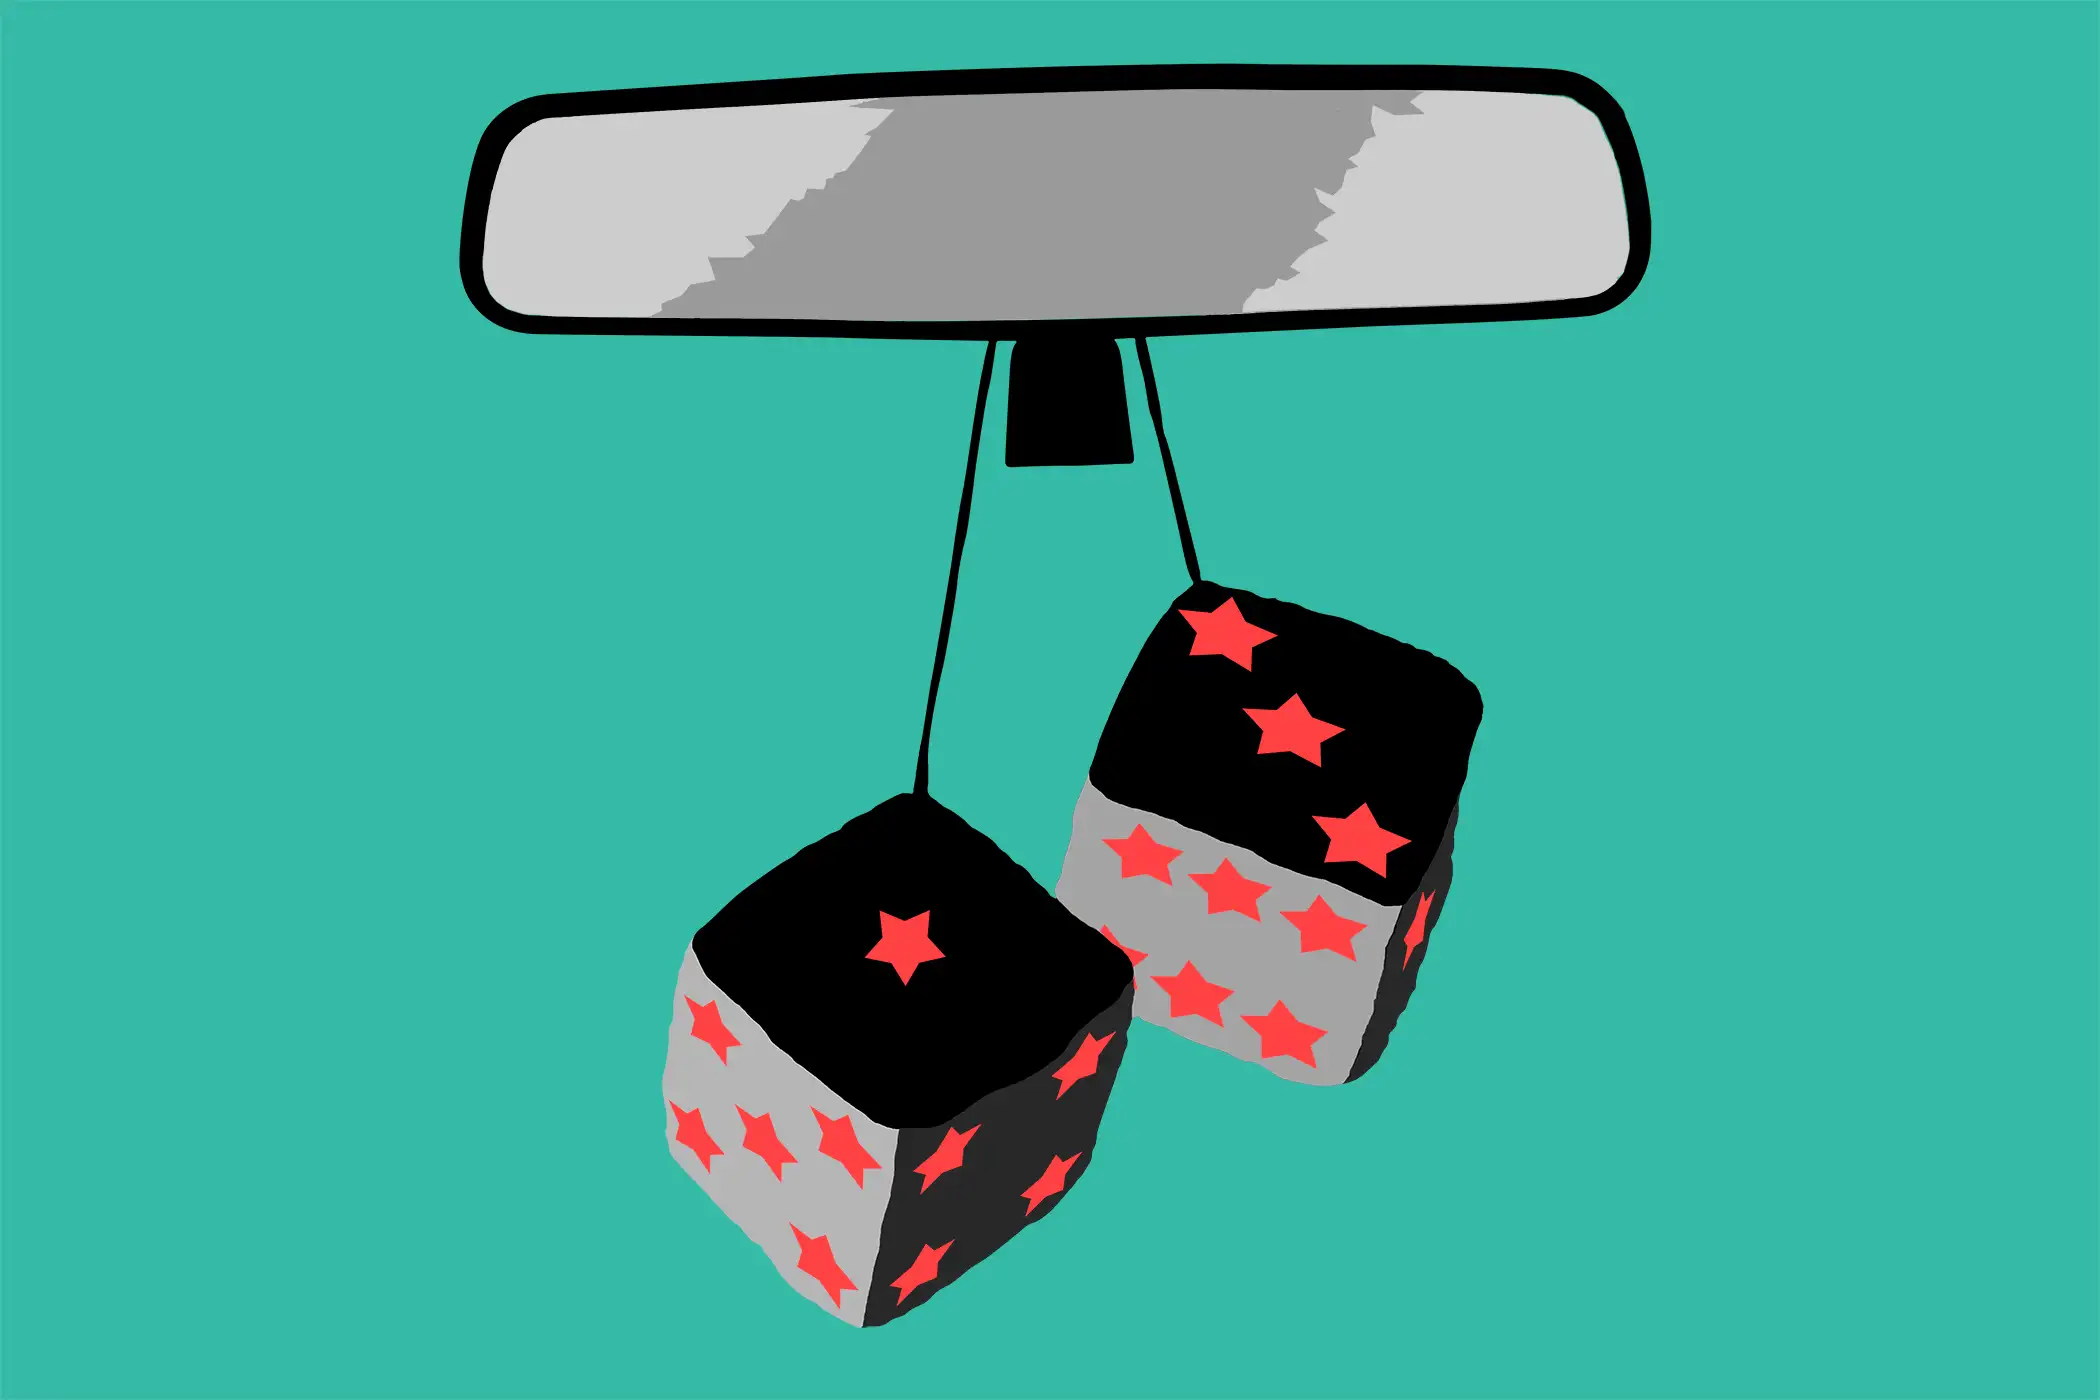 dice with stars hanging from mirror